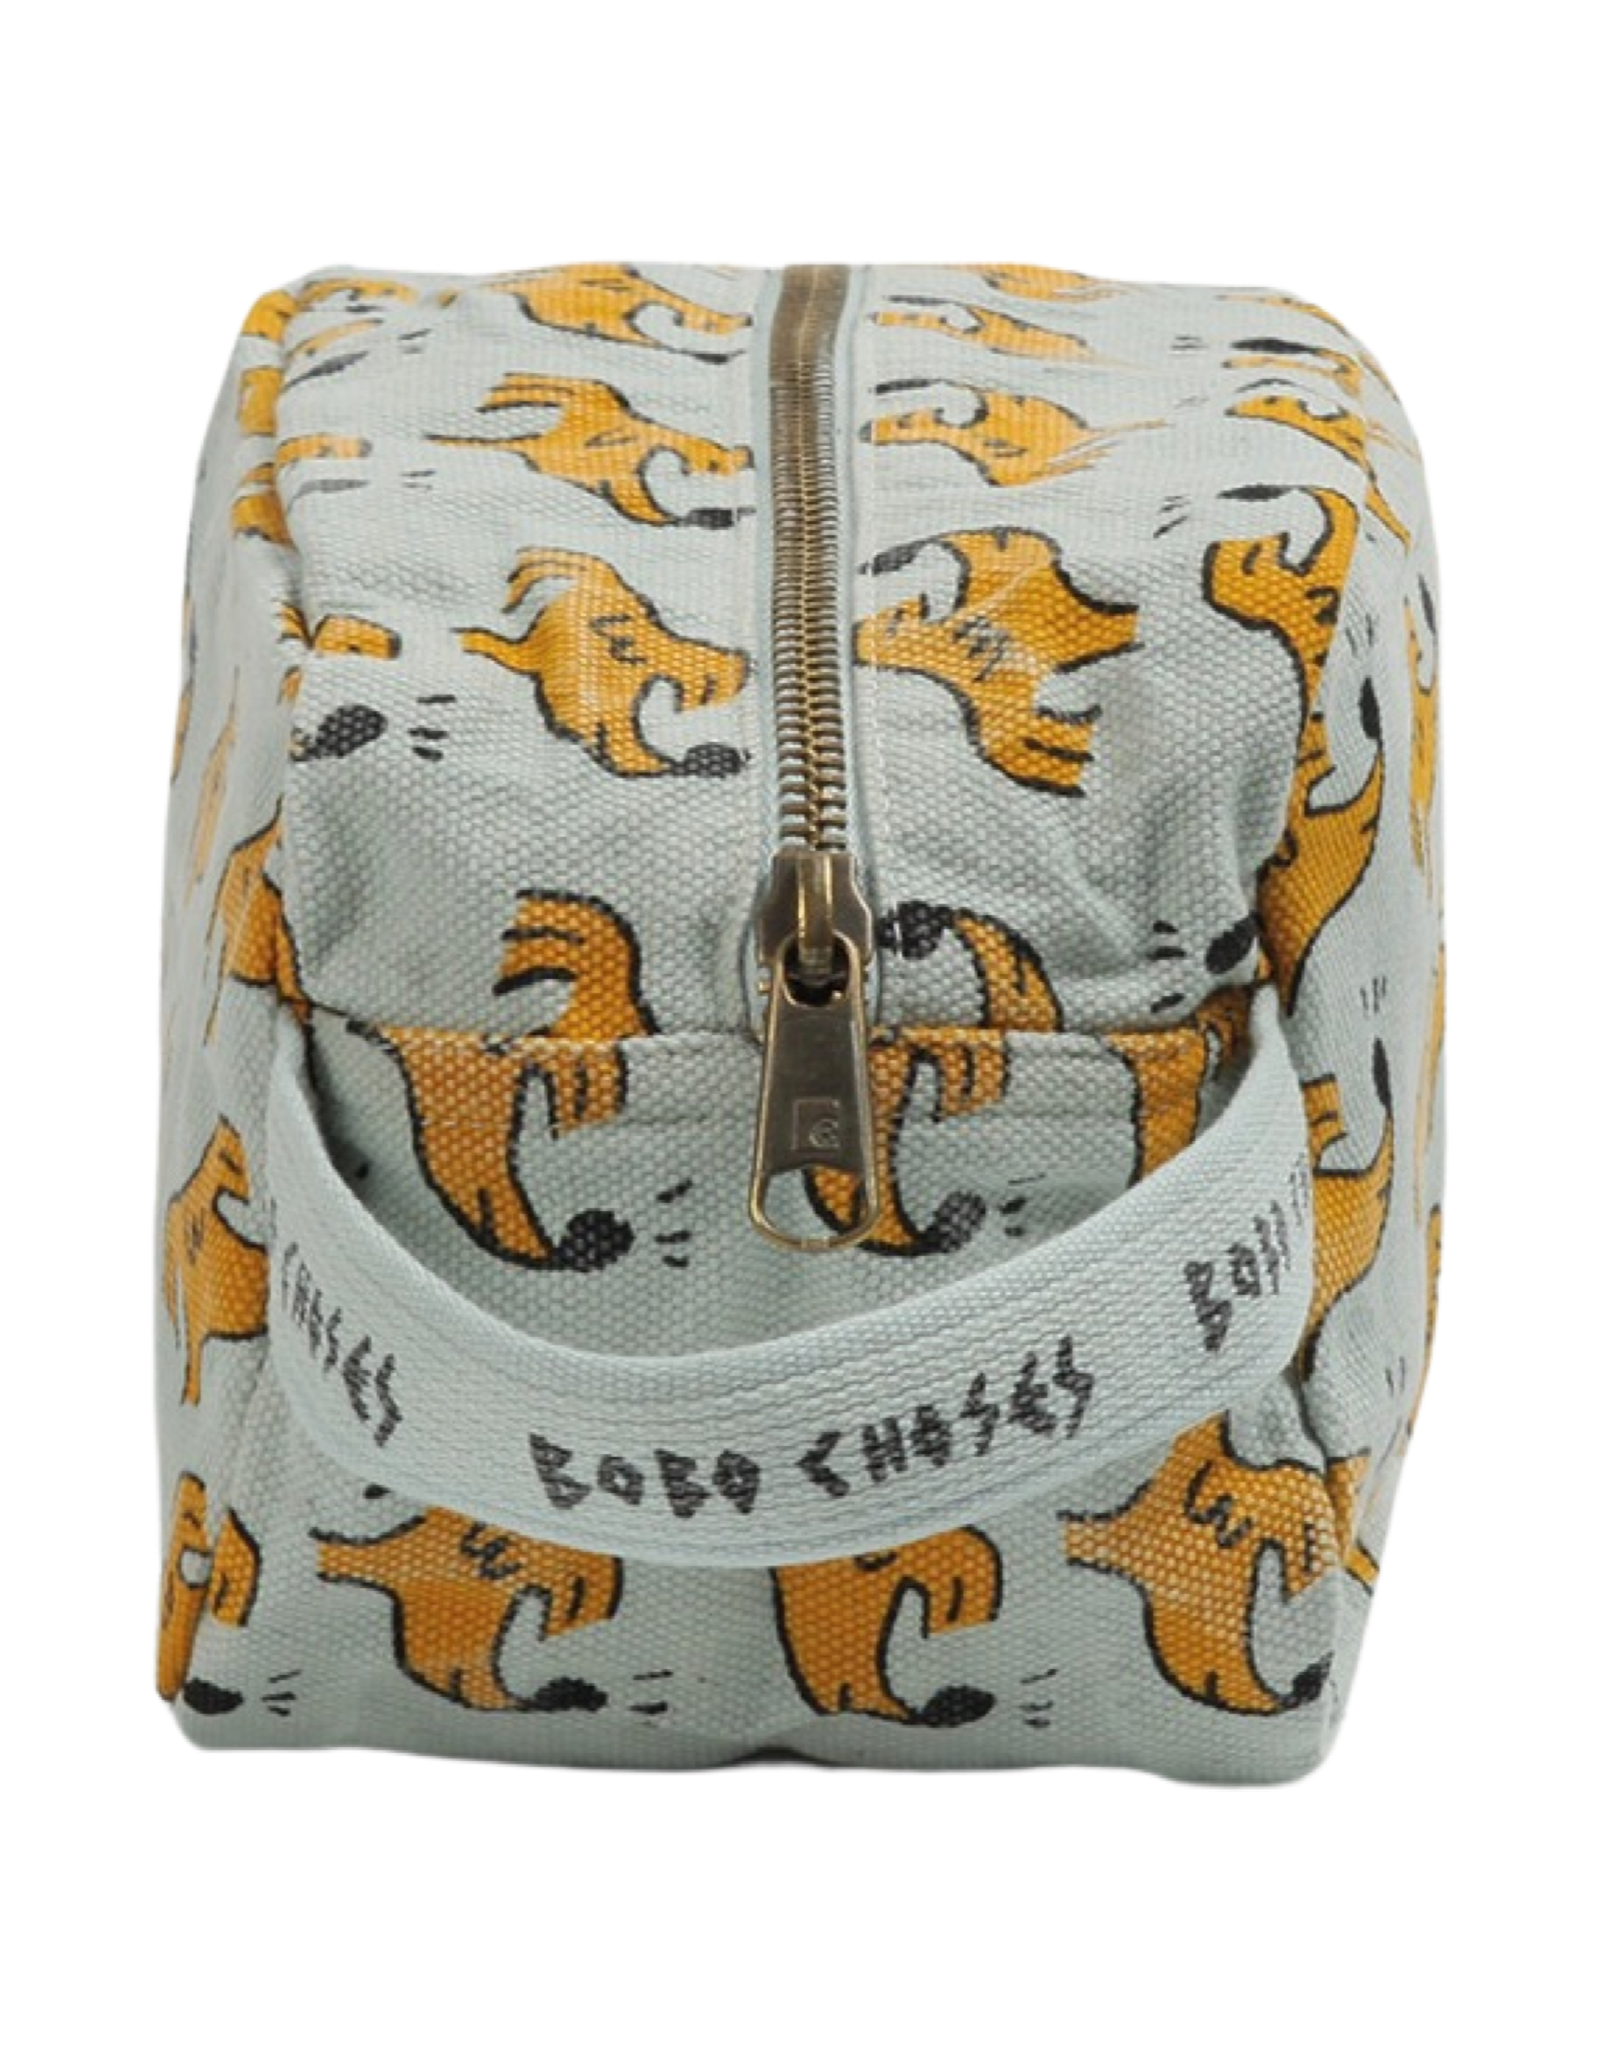 Bobo Choses Sniffy Dog all over pouch